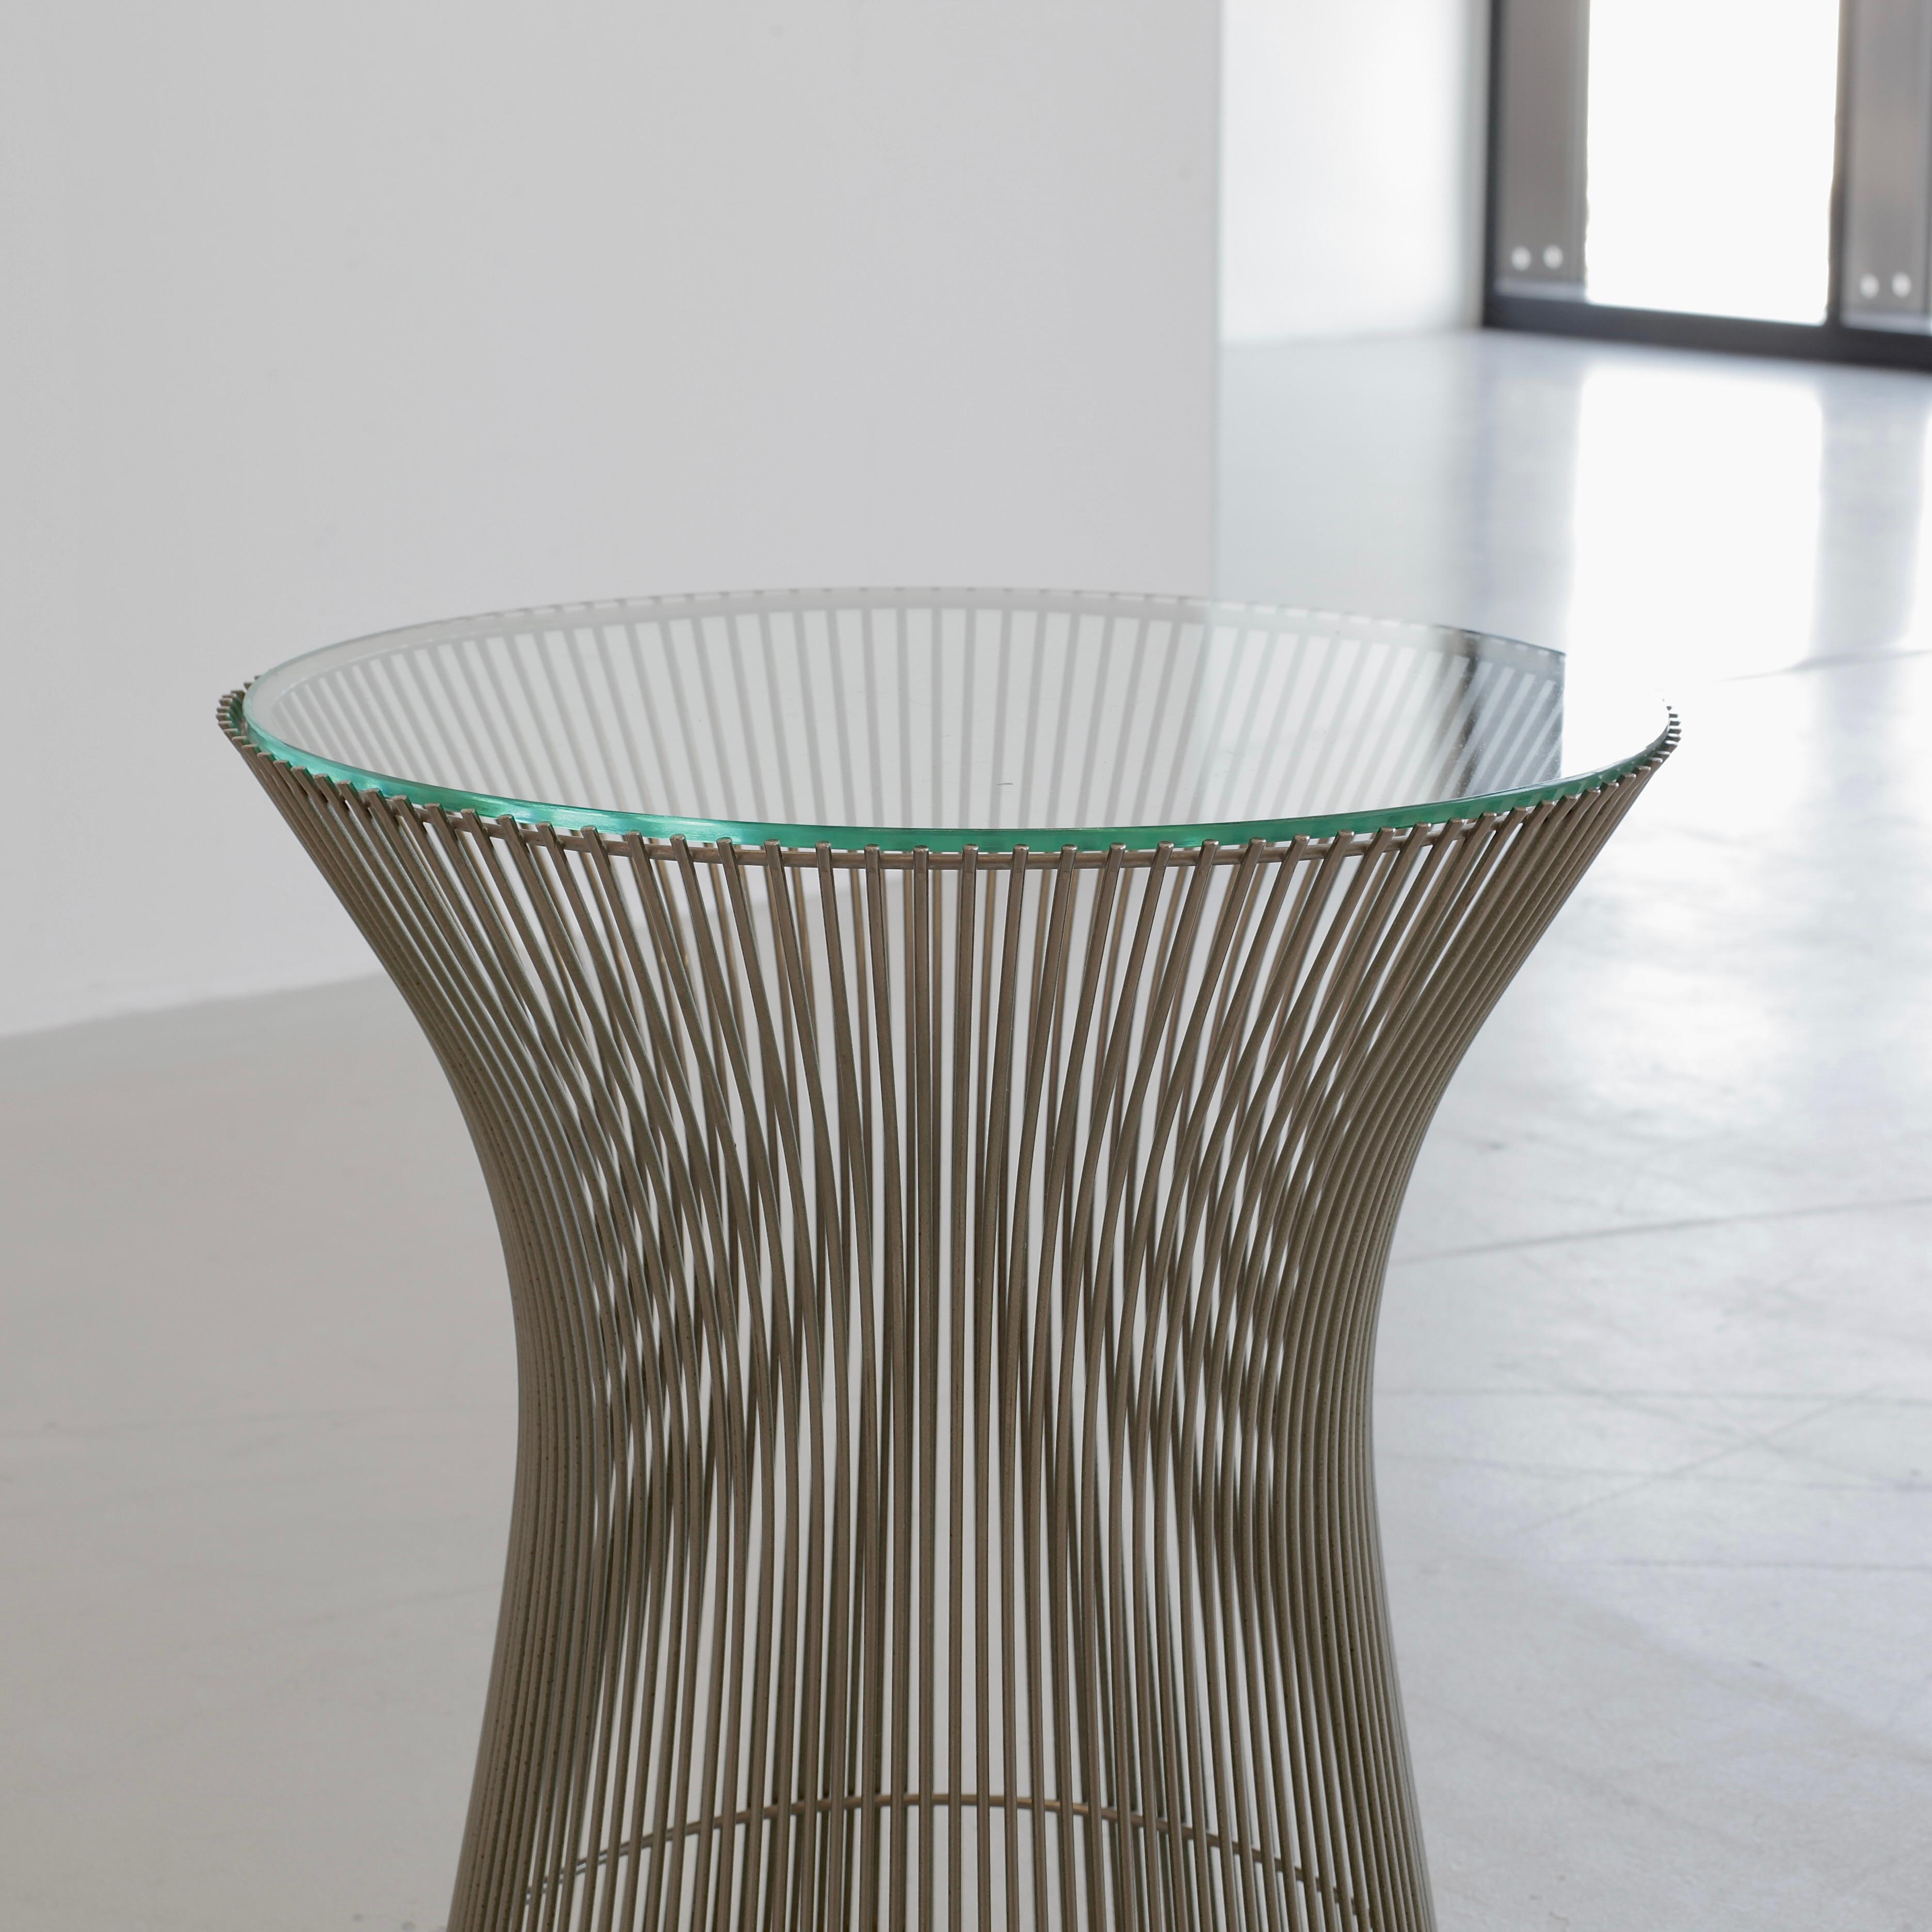 Side-table designed by Warren Platner. U.S.A., Knoll International, 1966.

Side-table with welded steel rods on the circular frame with round glass top insert. An iconic piece, table and sculpture in one!